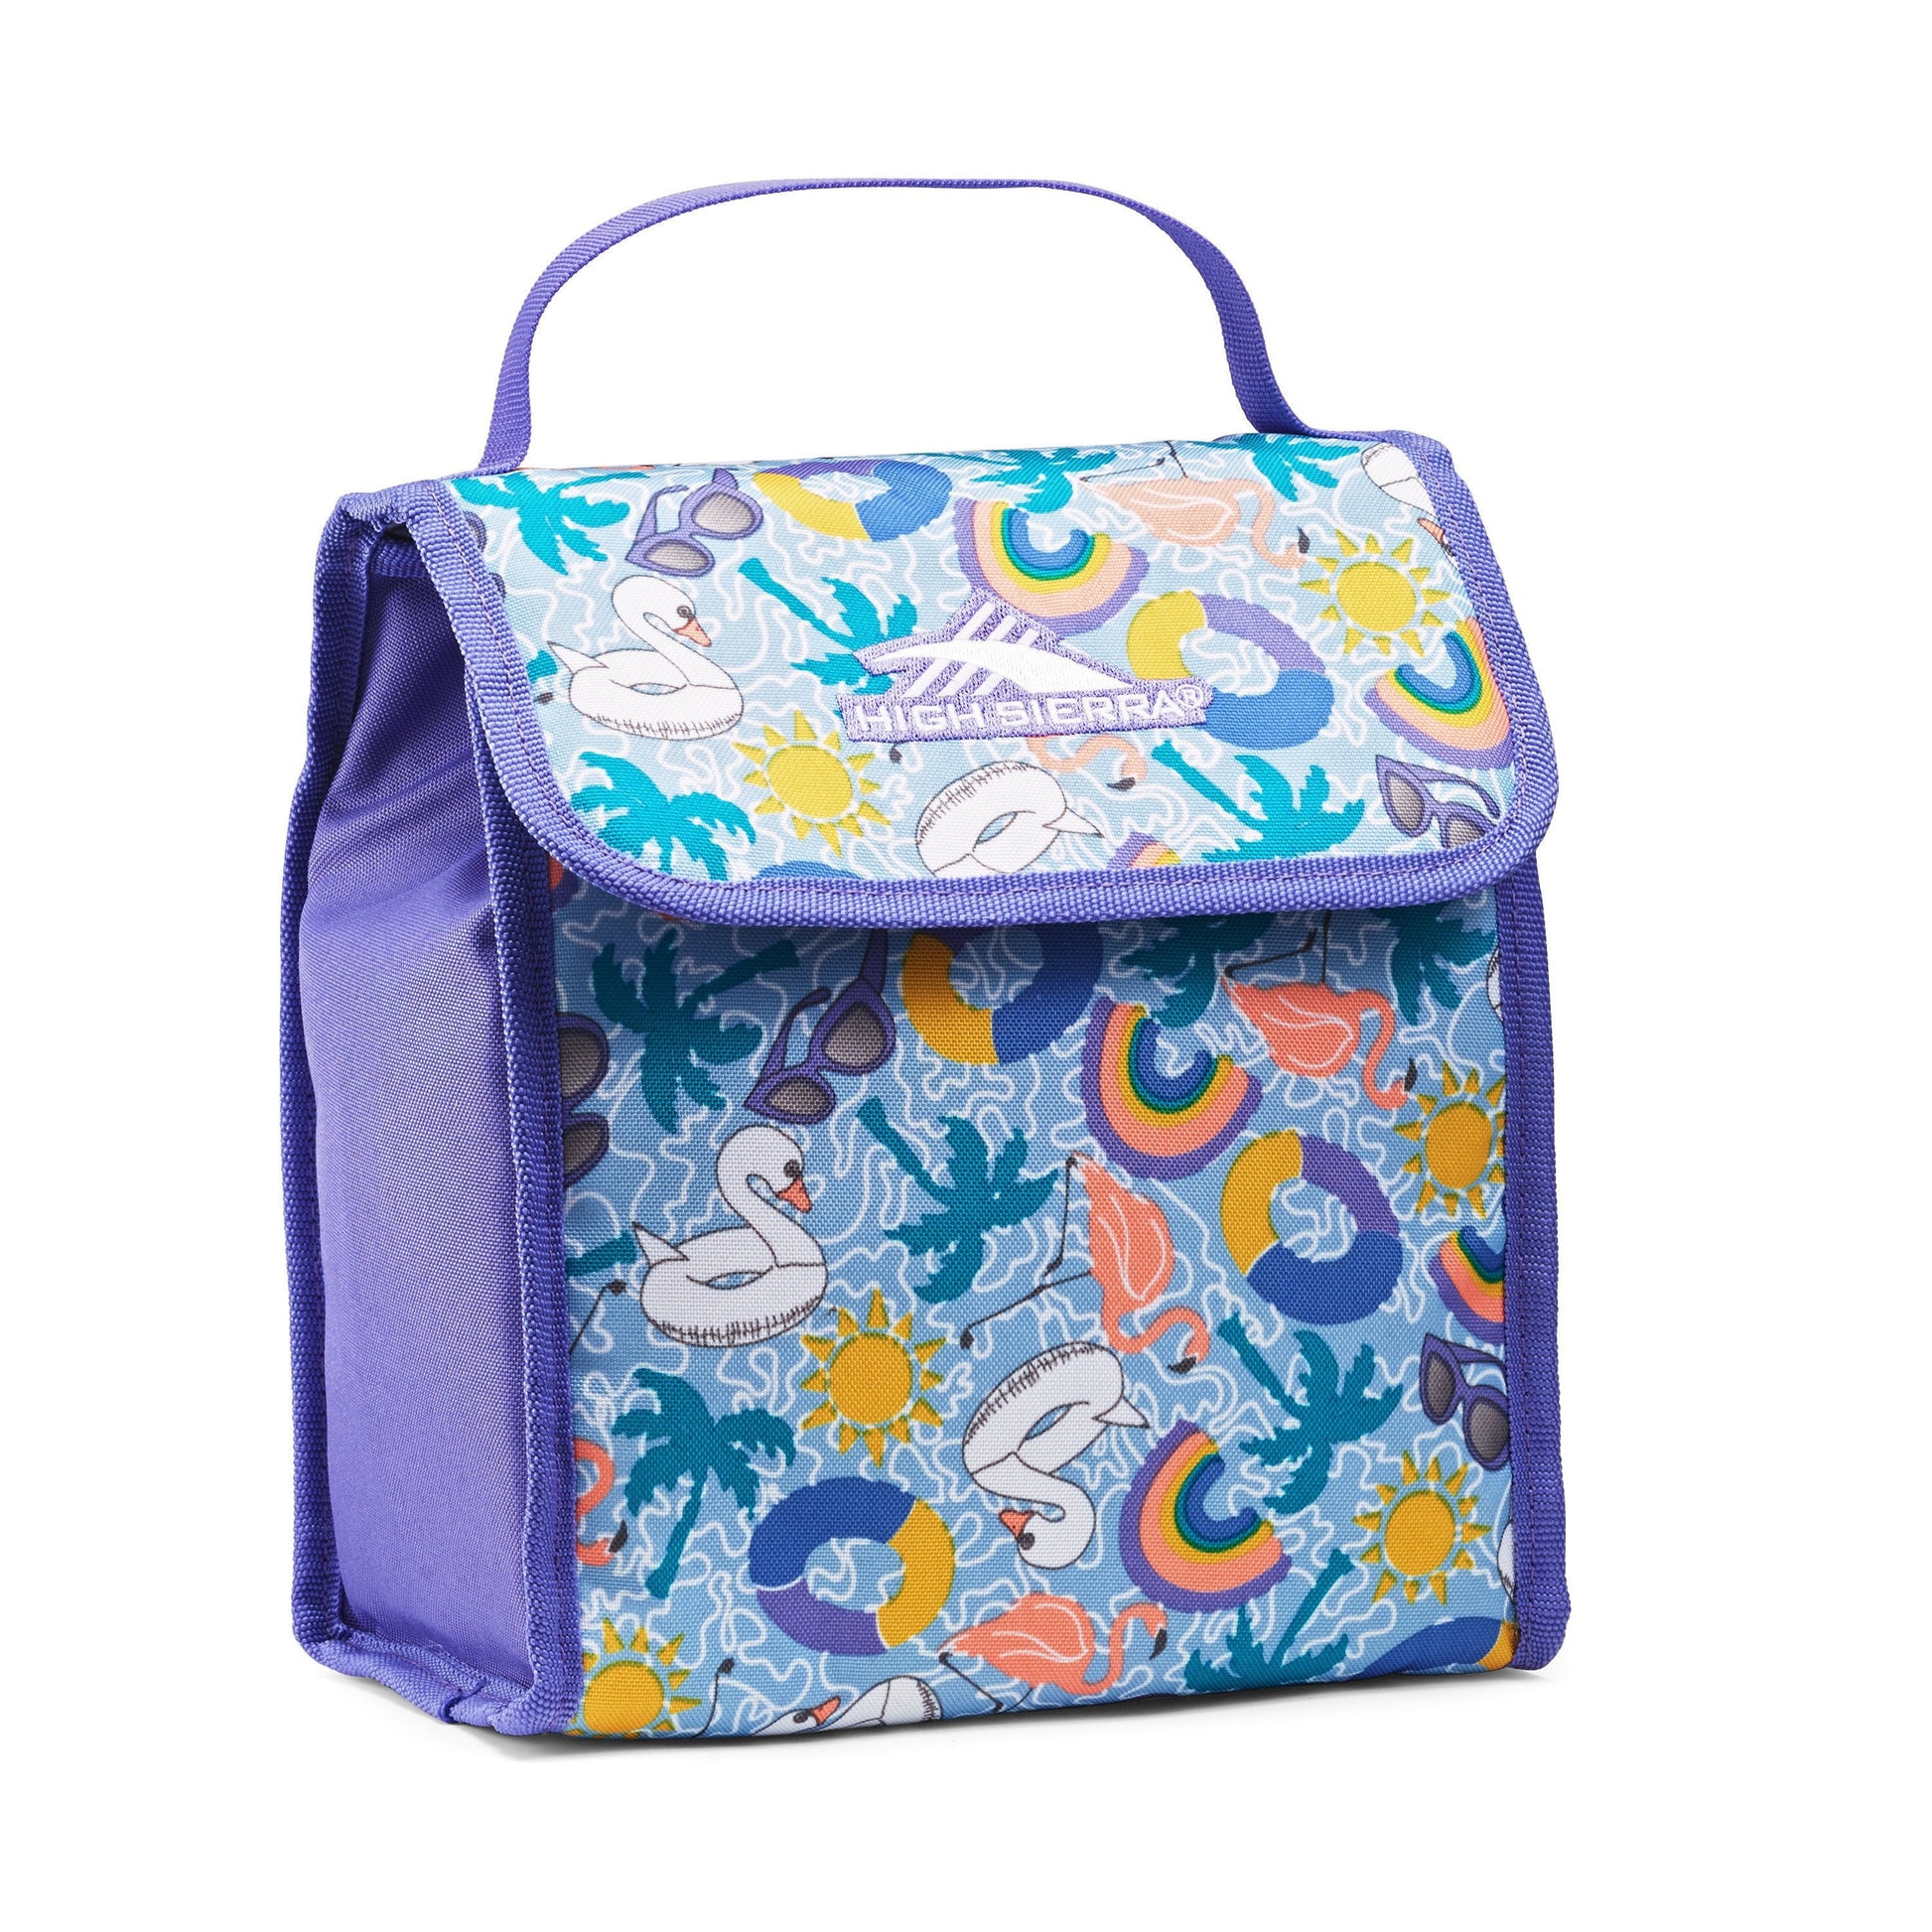 High Sierra Classic Lunch Kit - Pool Party/Lavender